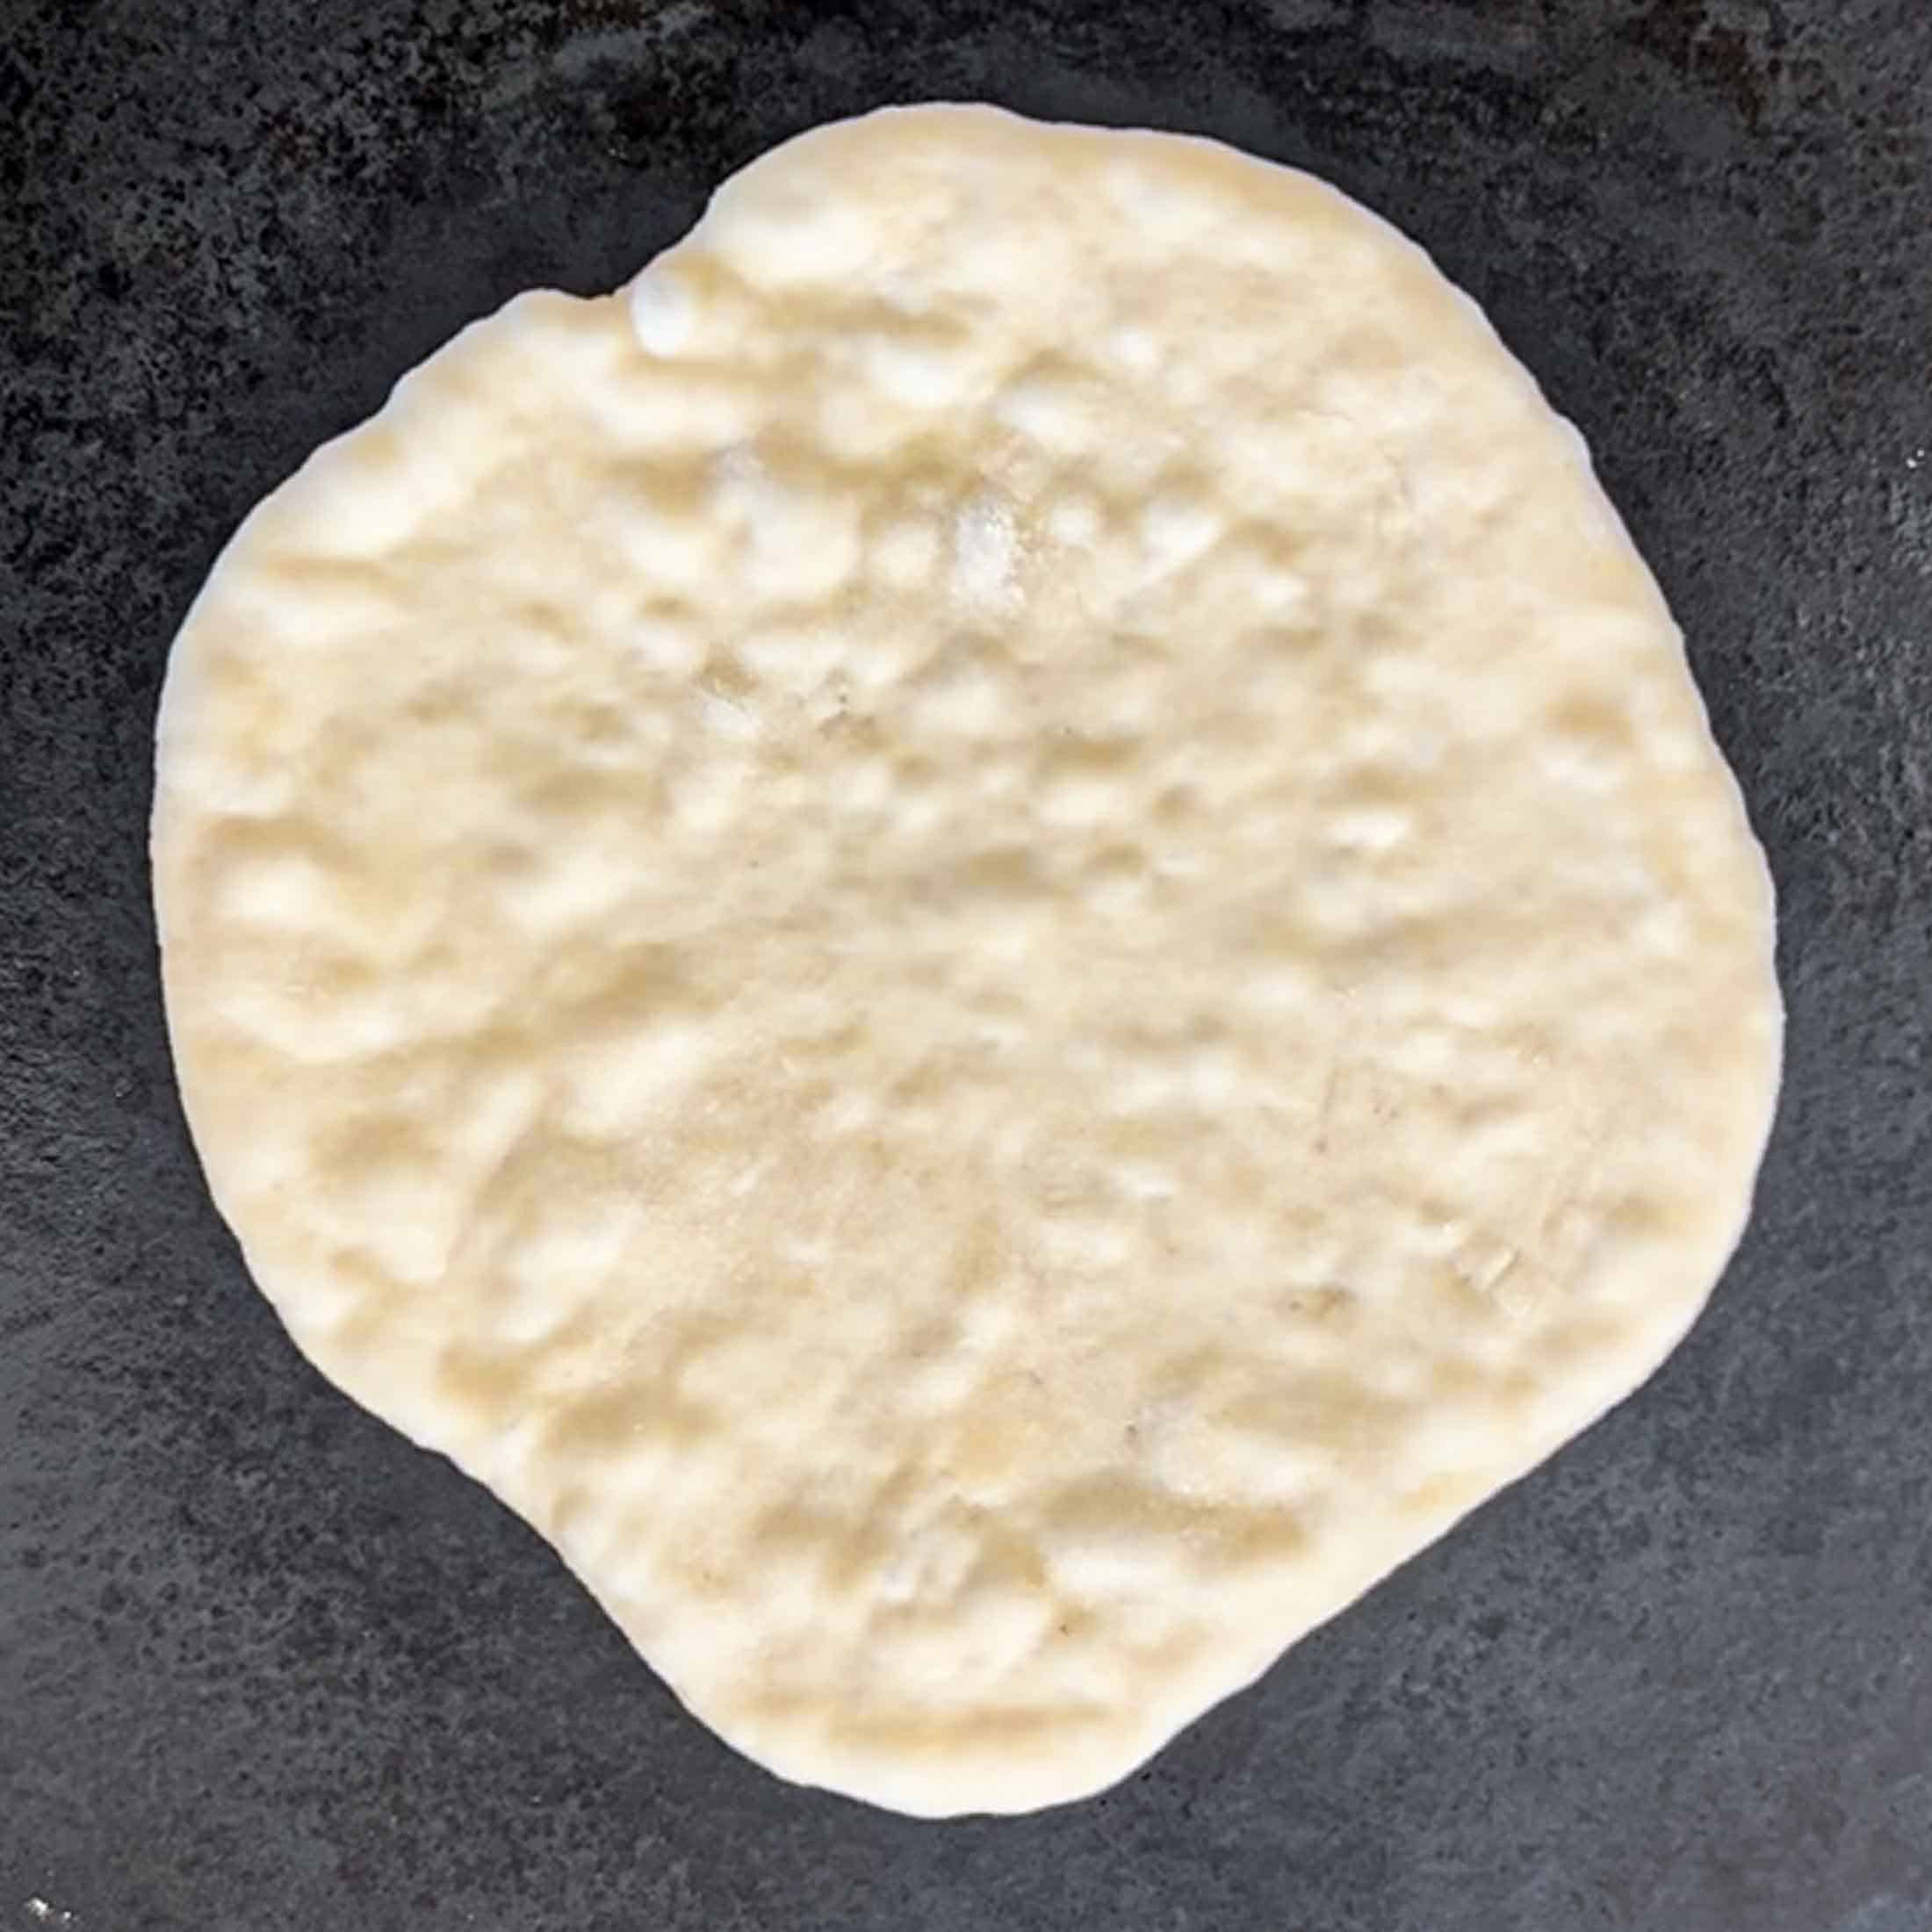 Sourdough naan bread on a hot cast iron pan, starting to bubble.